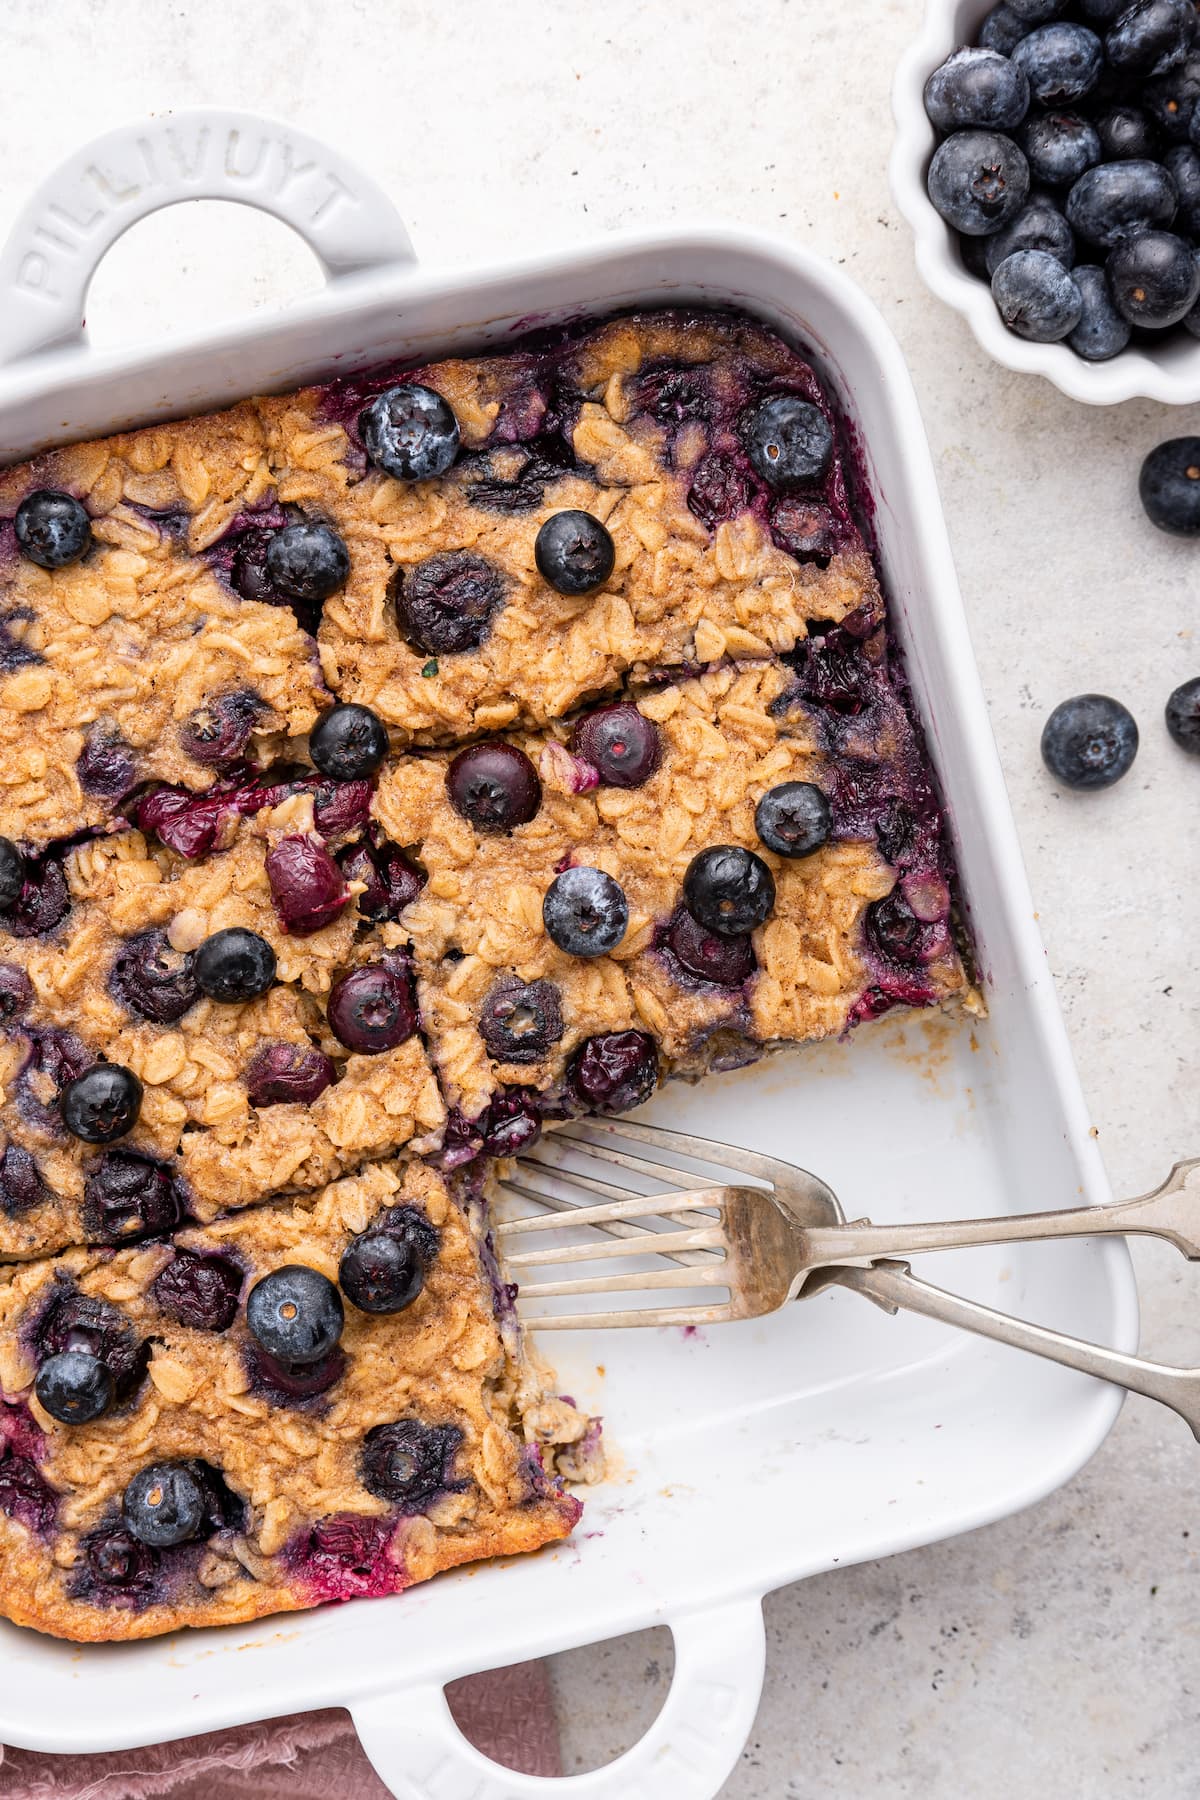 Blueberry baked oatmeal in a square baking dish with a piece taken from the dish. There are two metal forks in place of the missing piece.